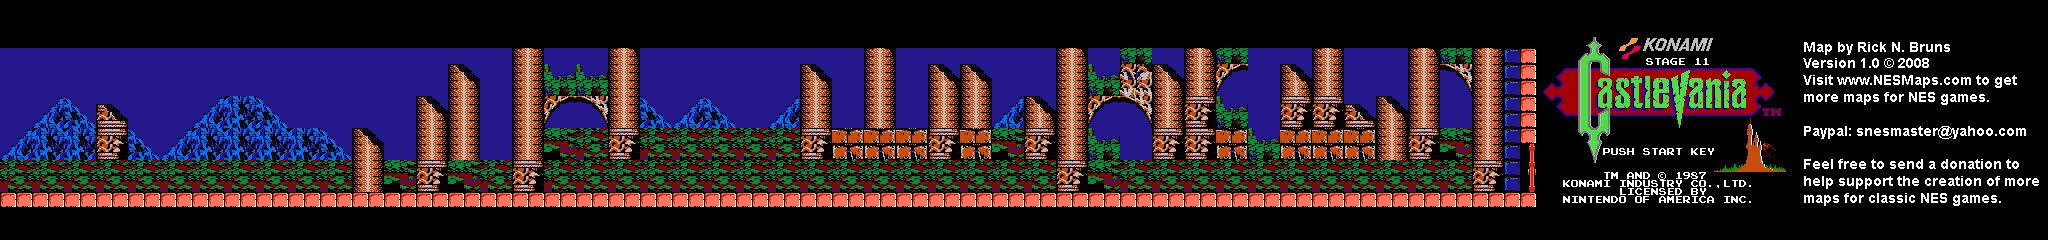 Castlevania - Stage 11 Nintendo NES Background Only Map